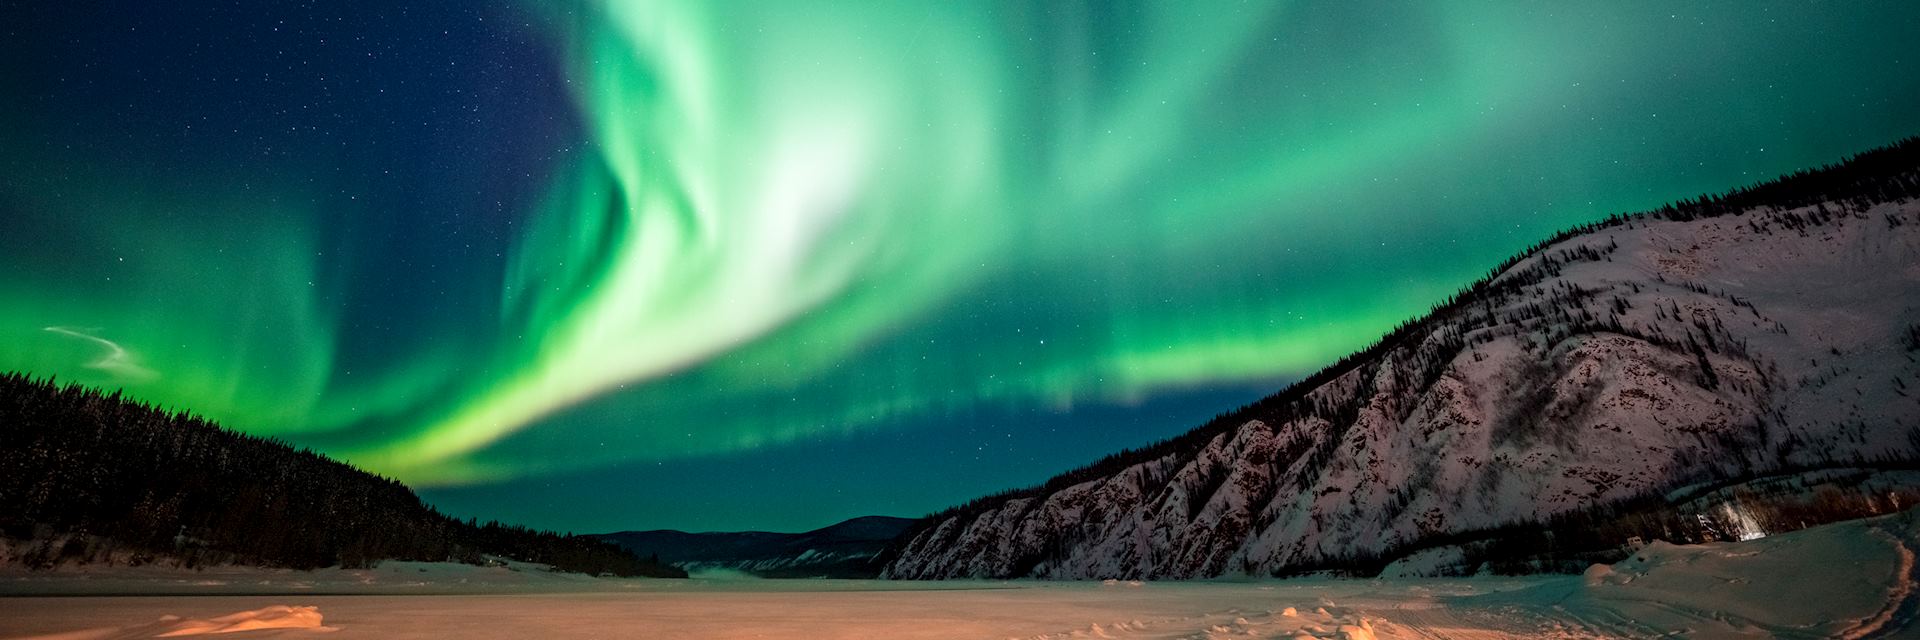 Northern lights in Canada and Alaska